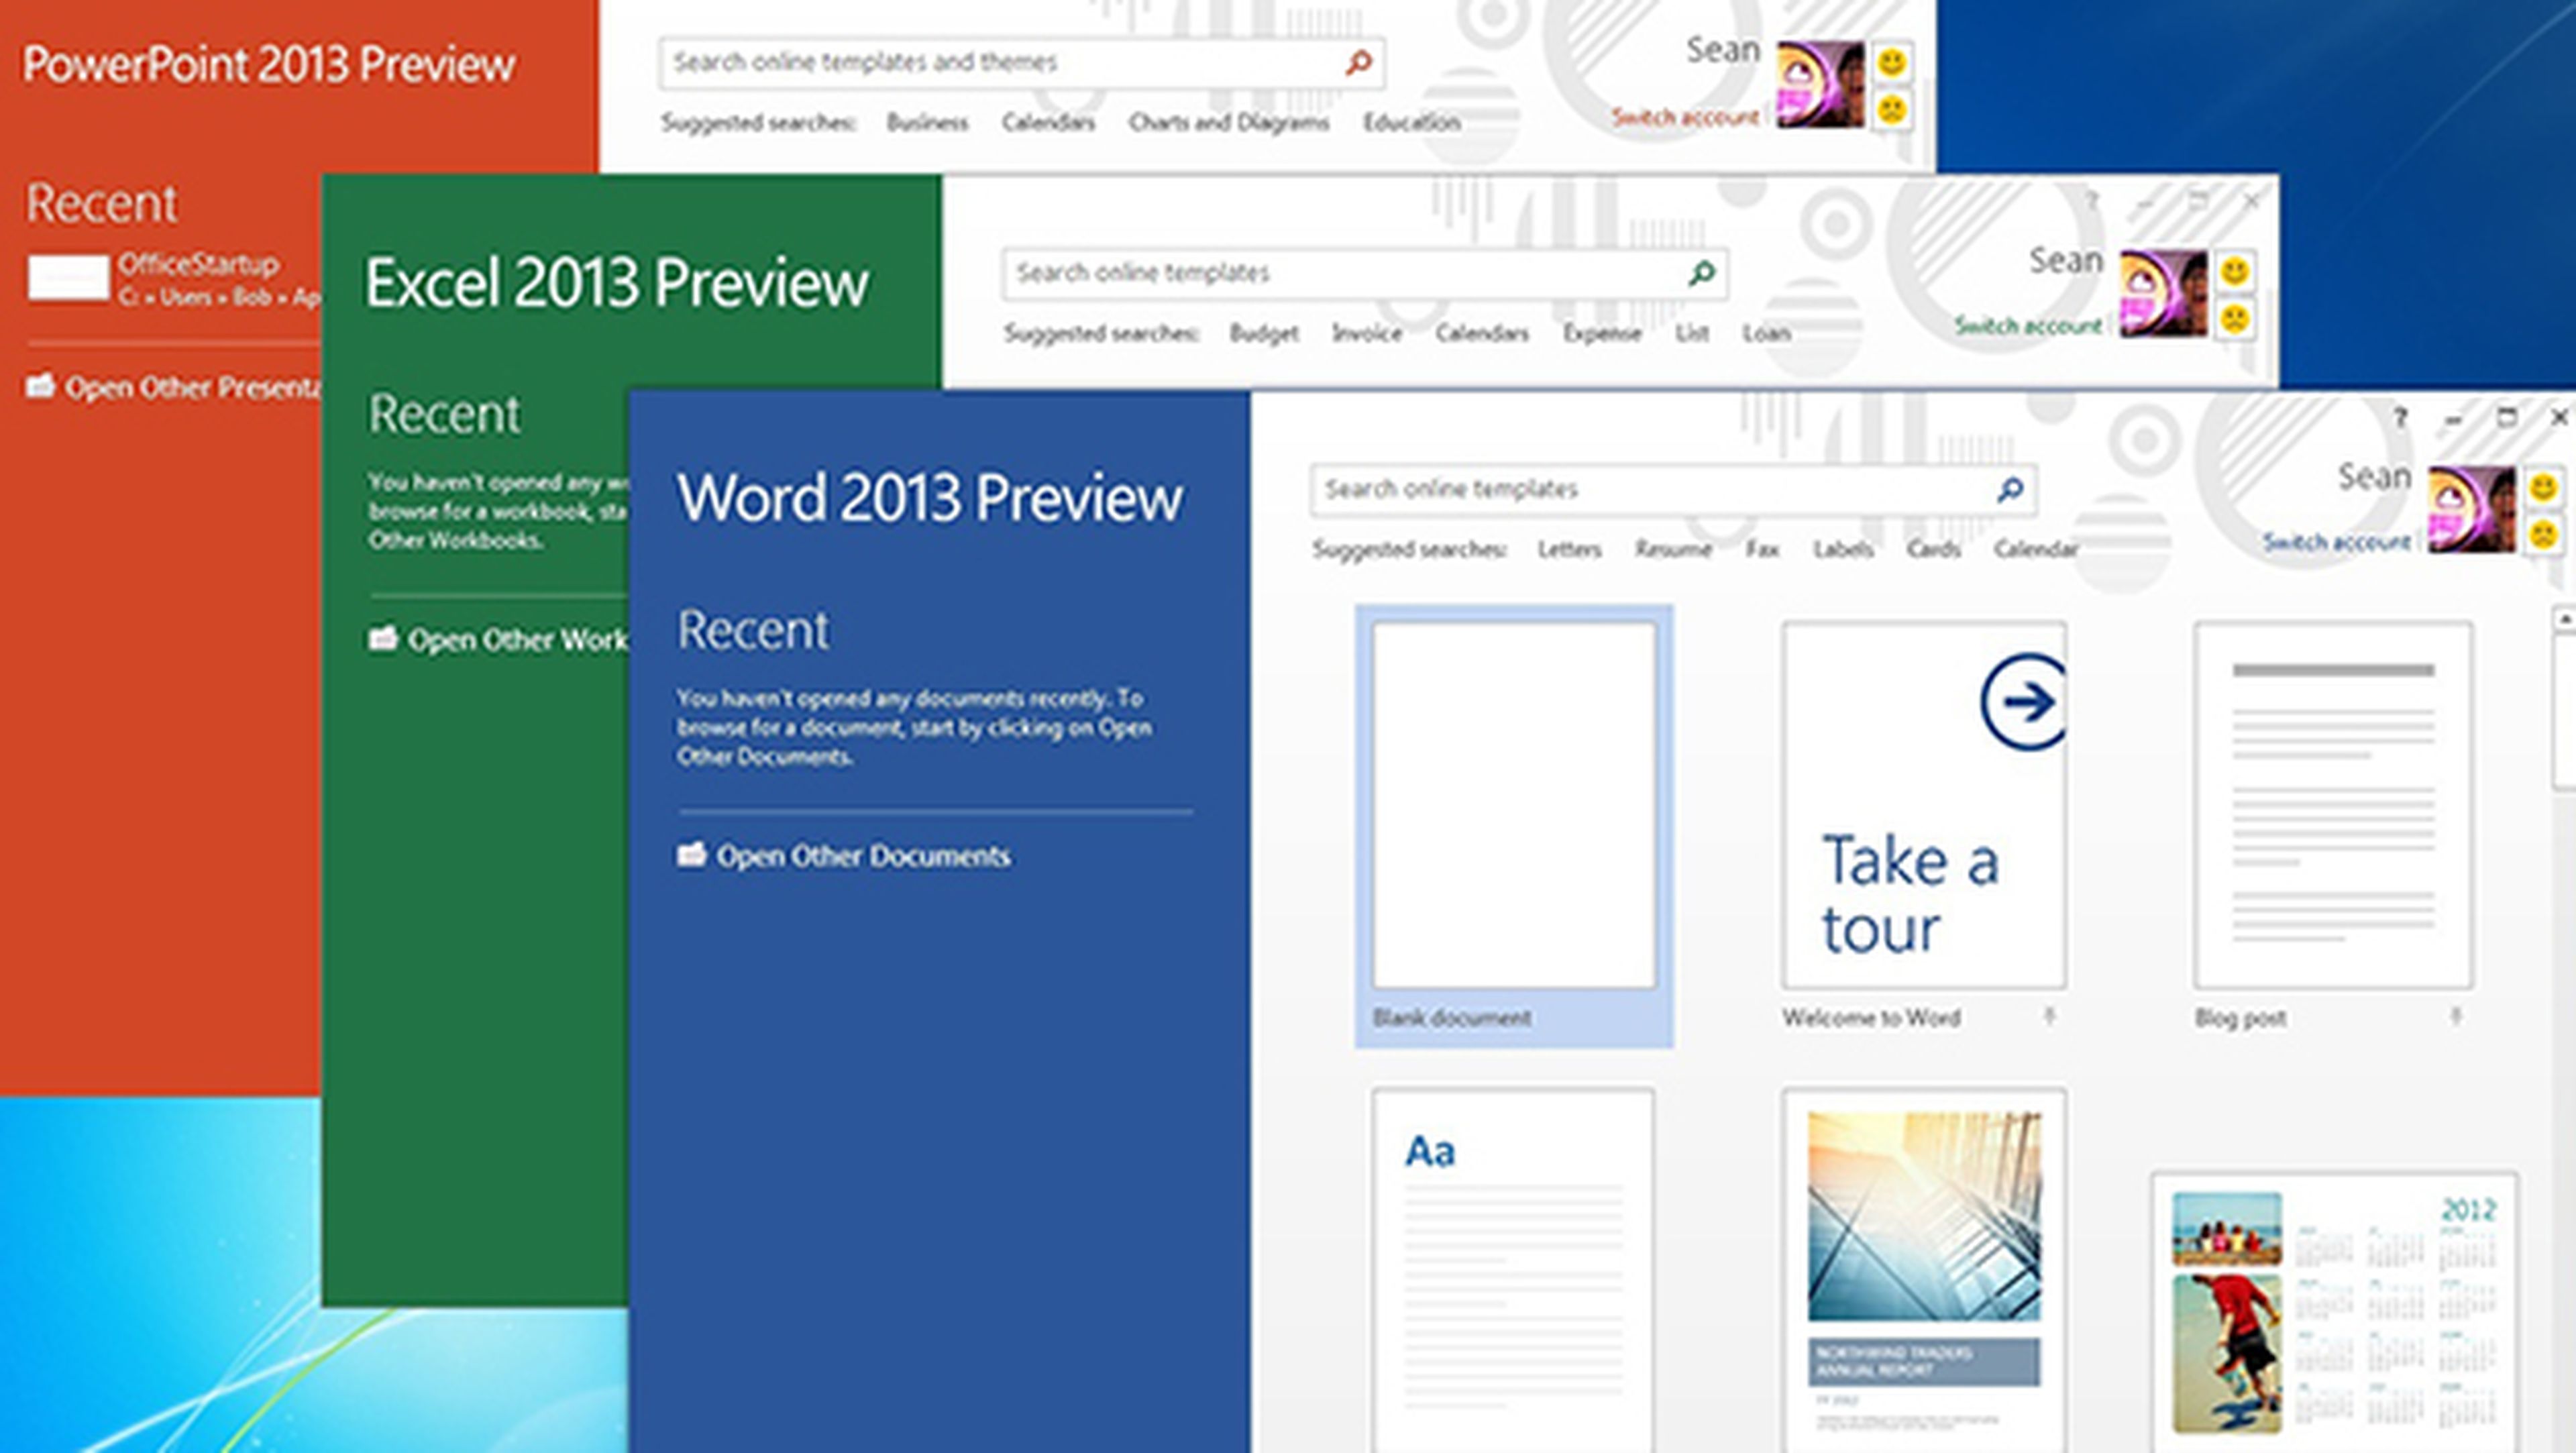 How to update Microsoft Office 2013 Service Pack 1